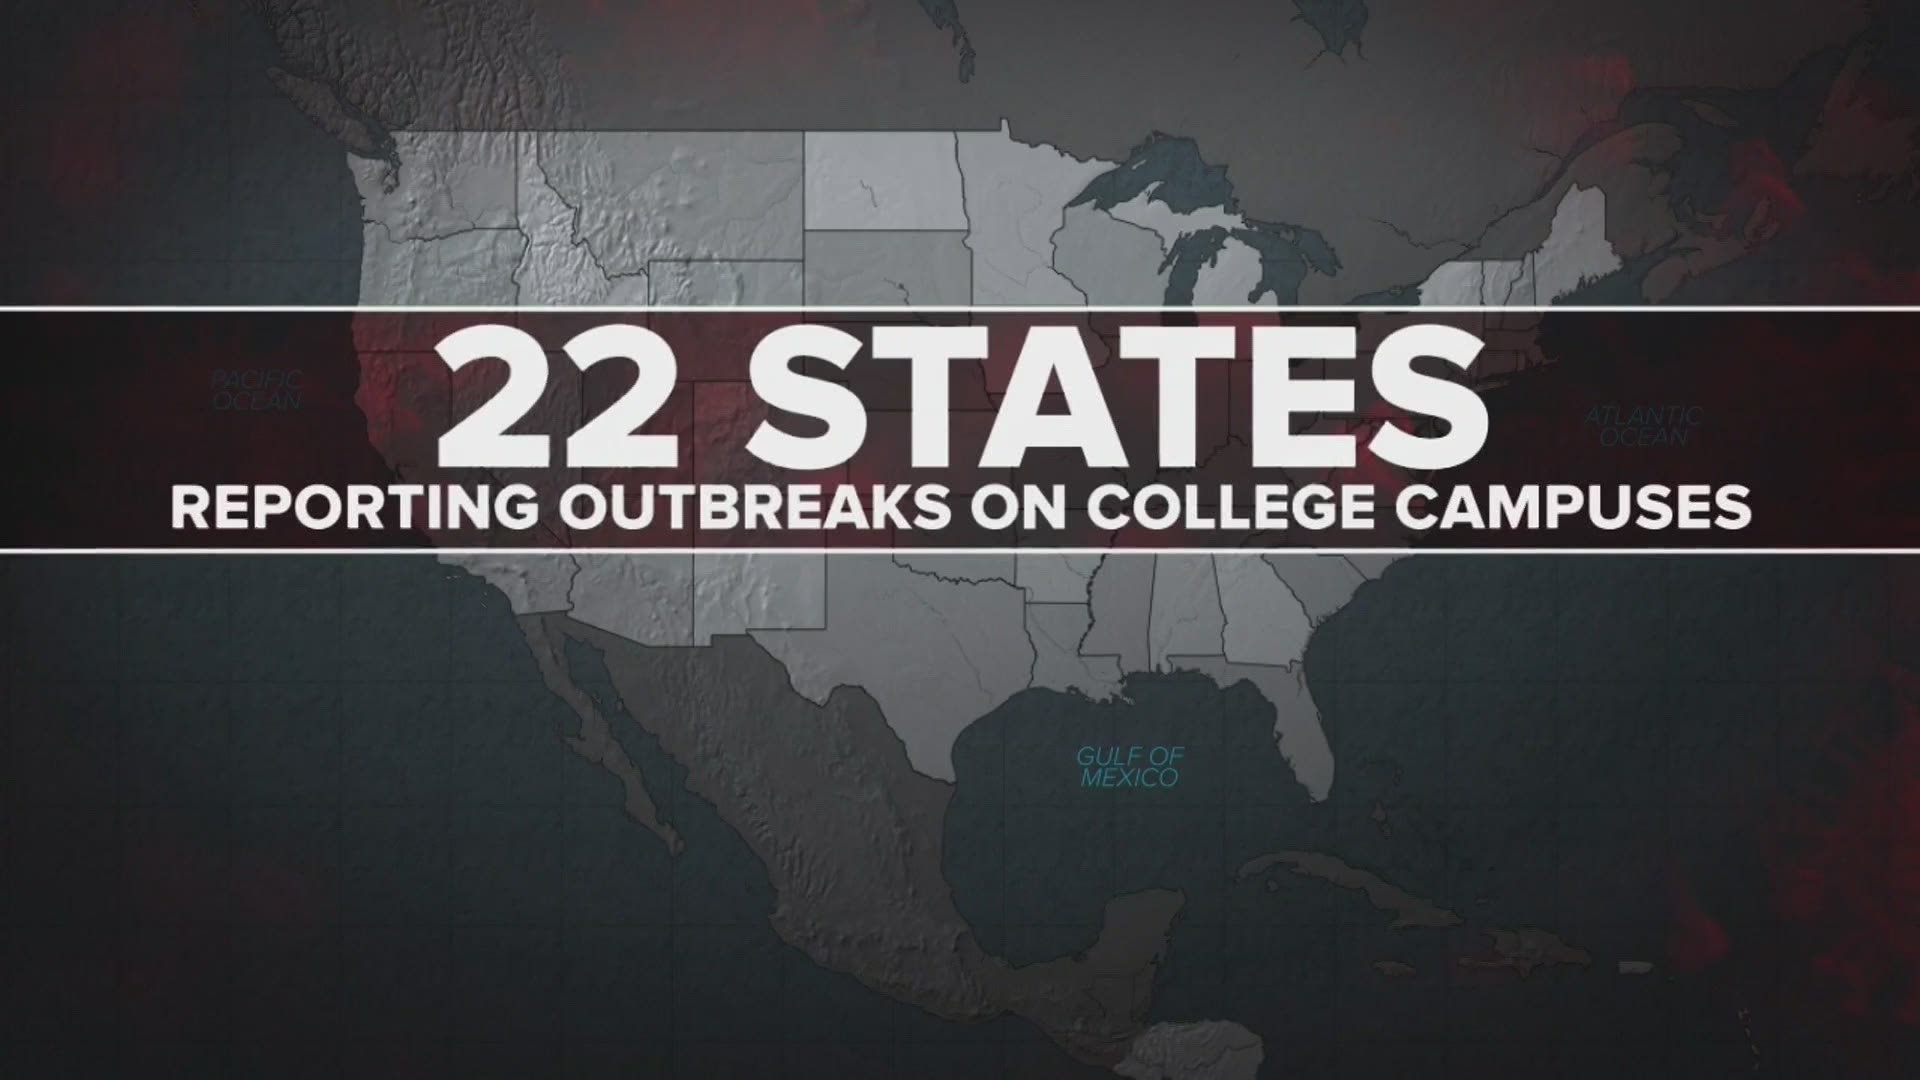 Notre Dame and N.C. State are just two campuses across 22 states reporting college outbreaks.